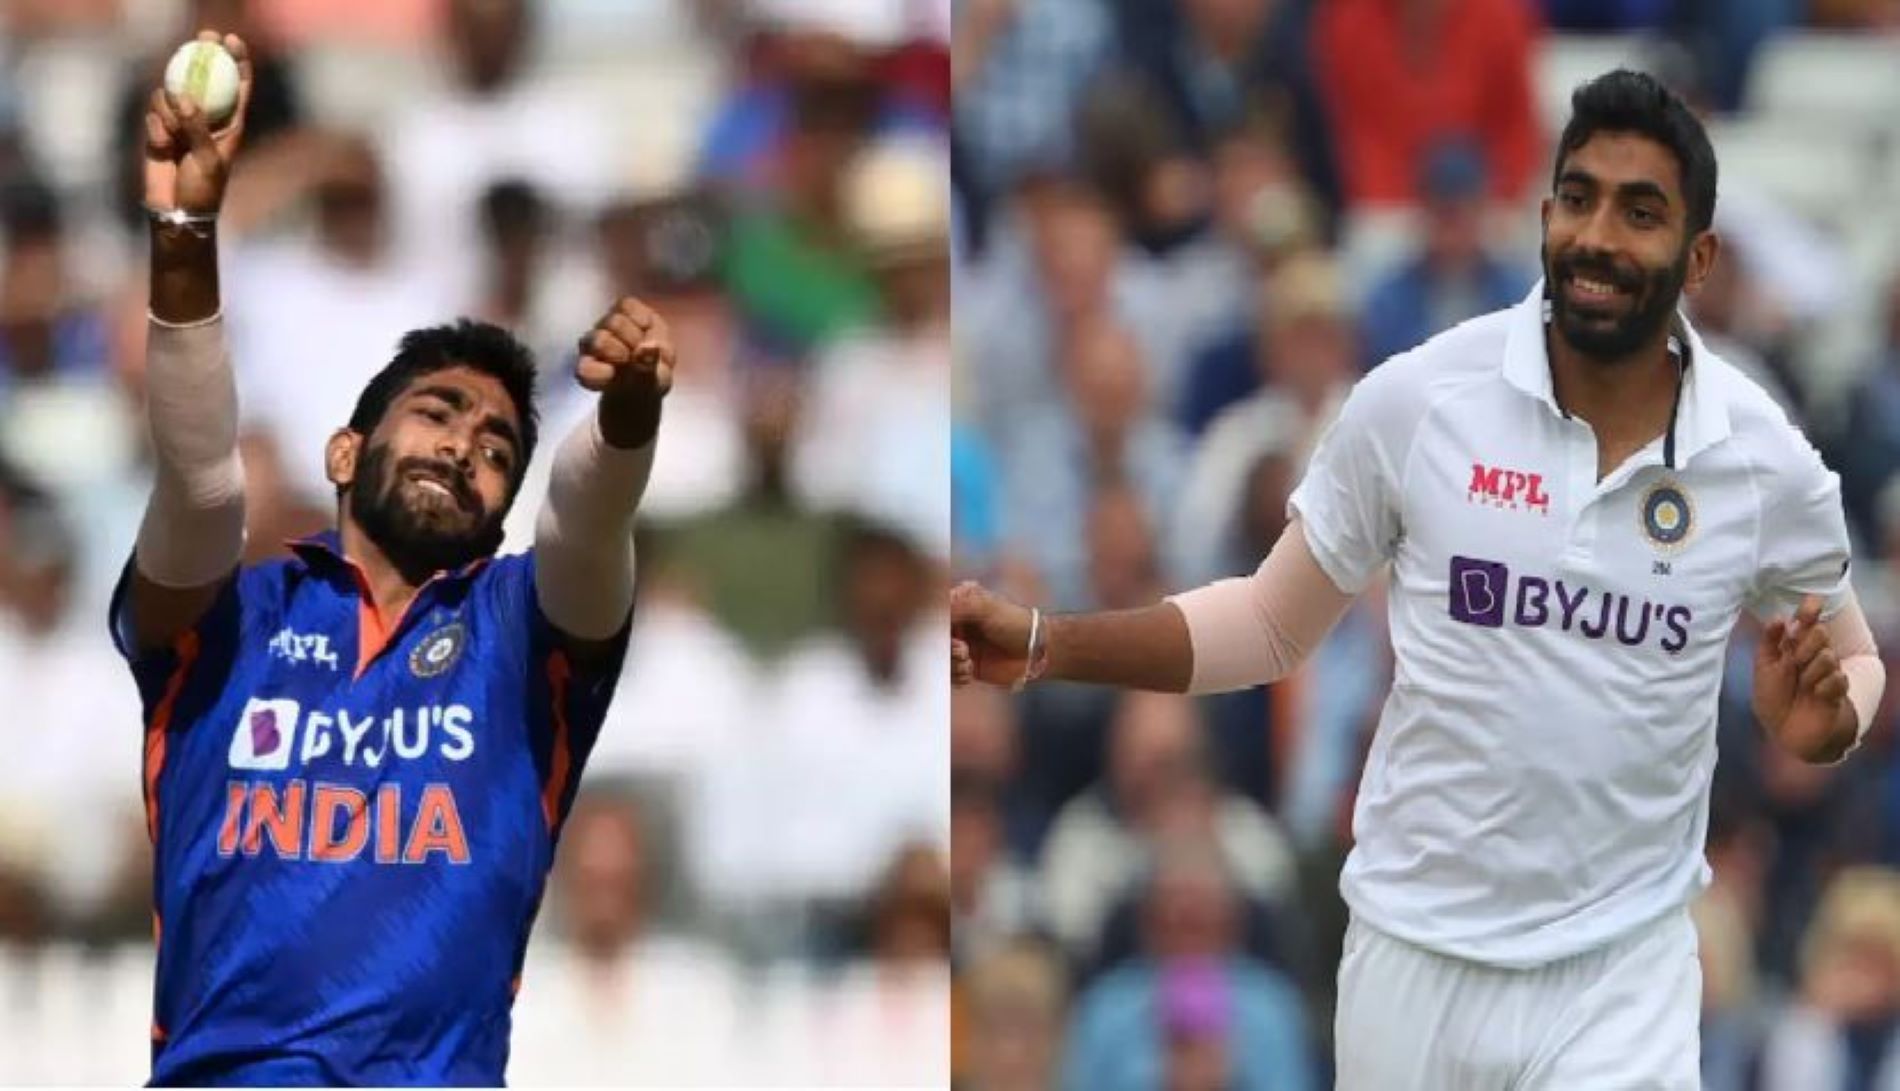 Bumrah will back in Indian colors after almost an year